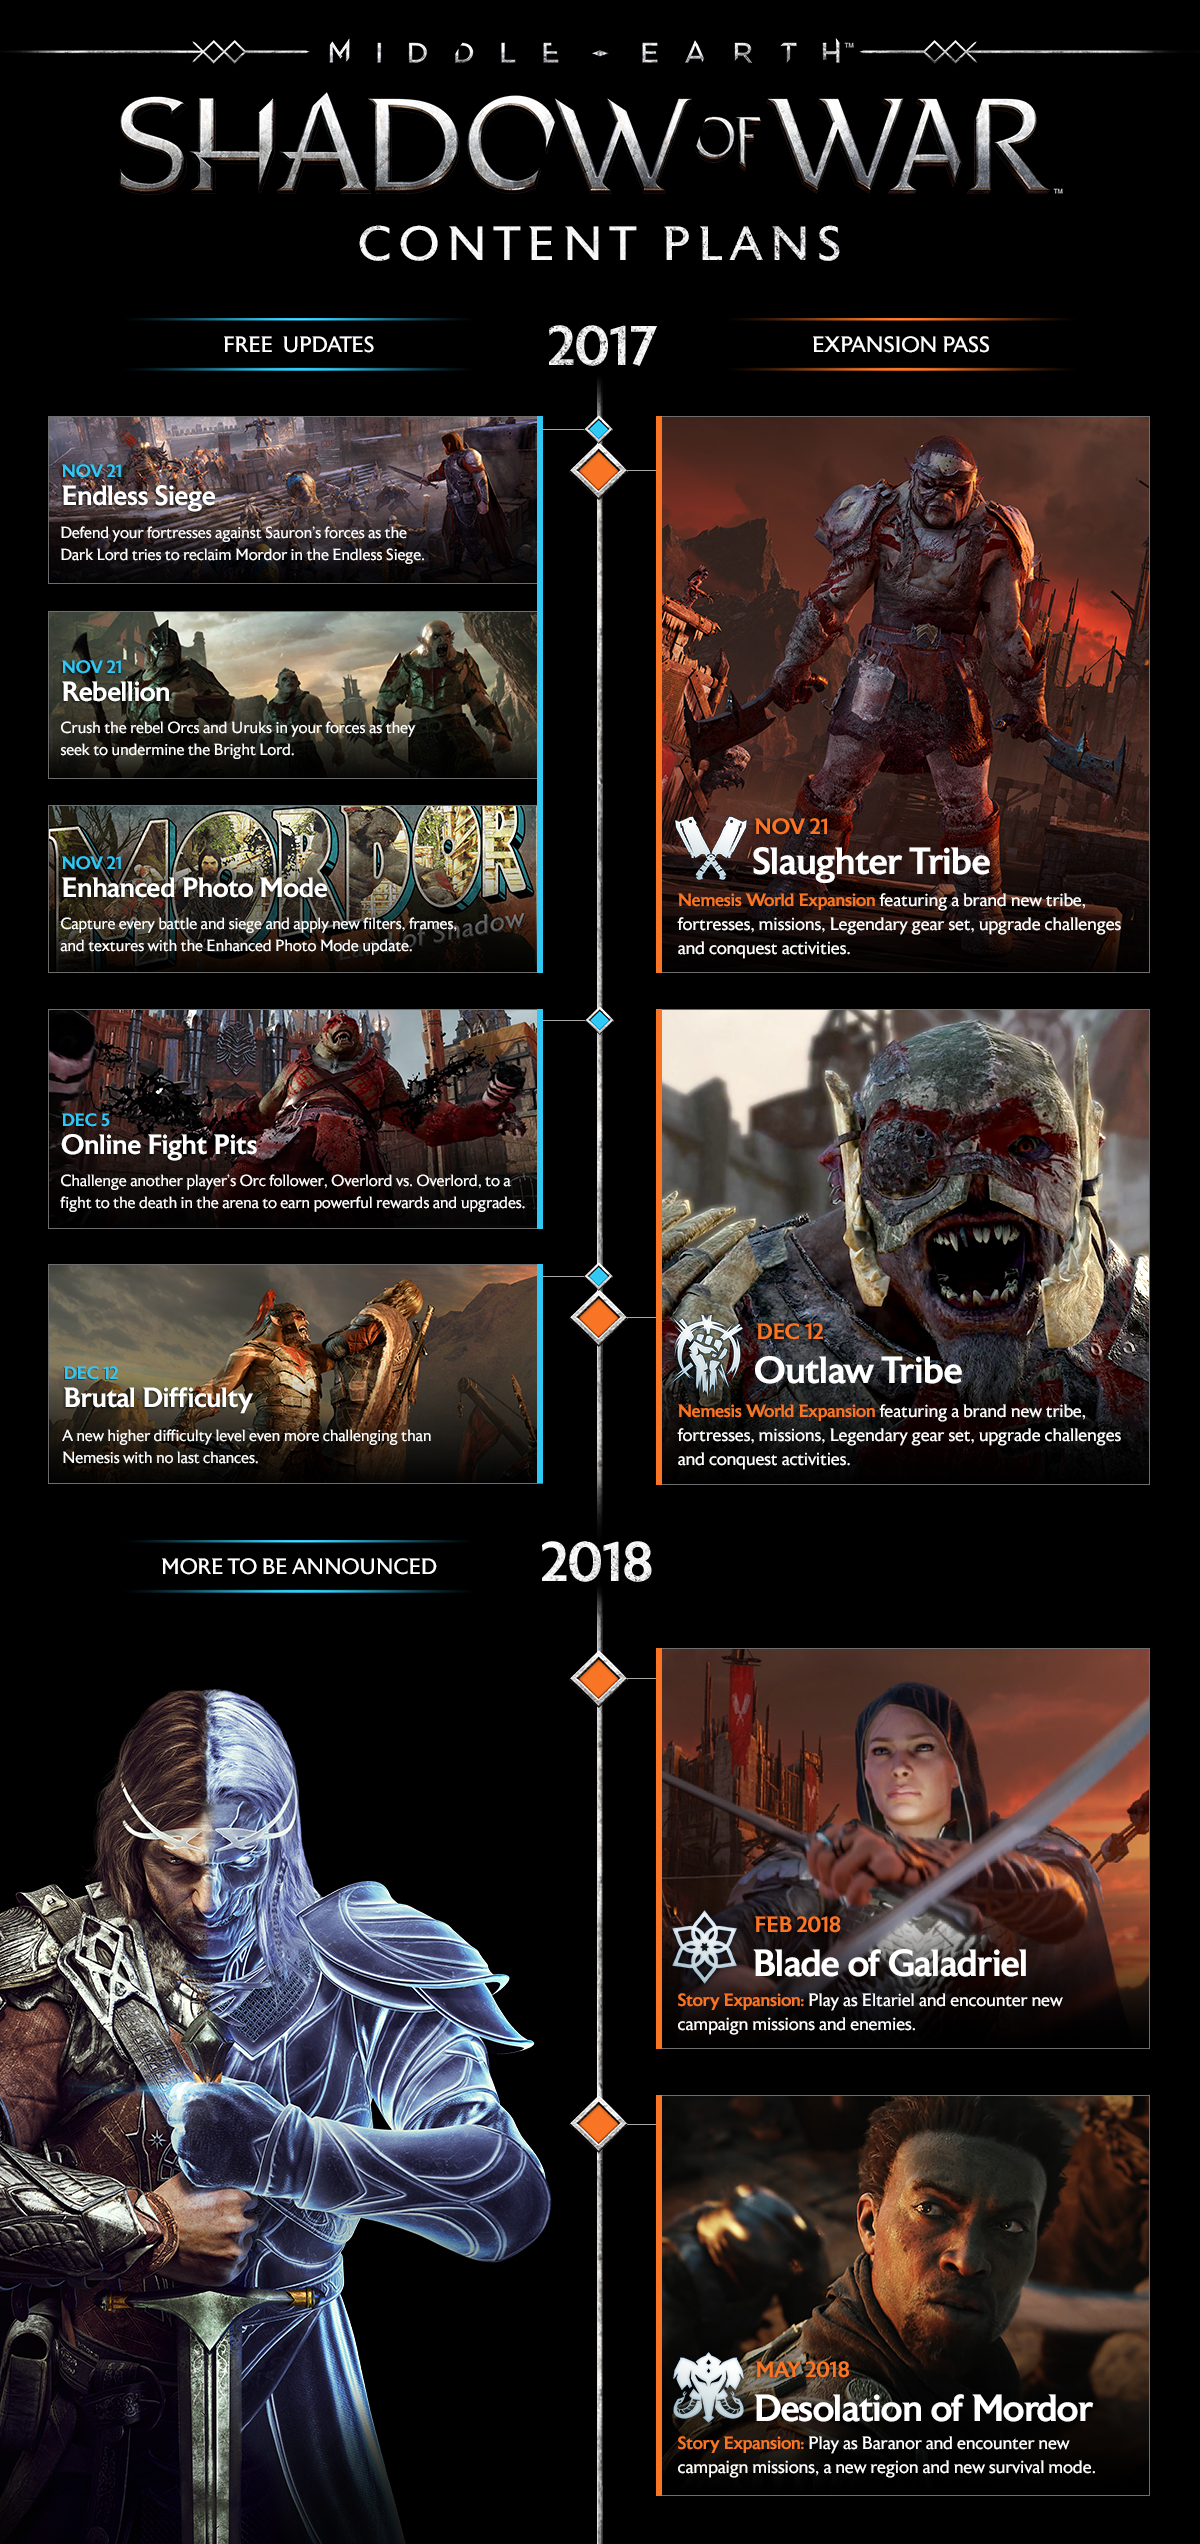 Warner Bros. Middle-Earth: Shadow of War for PlayStation 4 - image 5 of 6